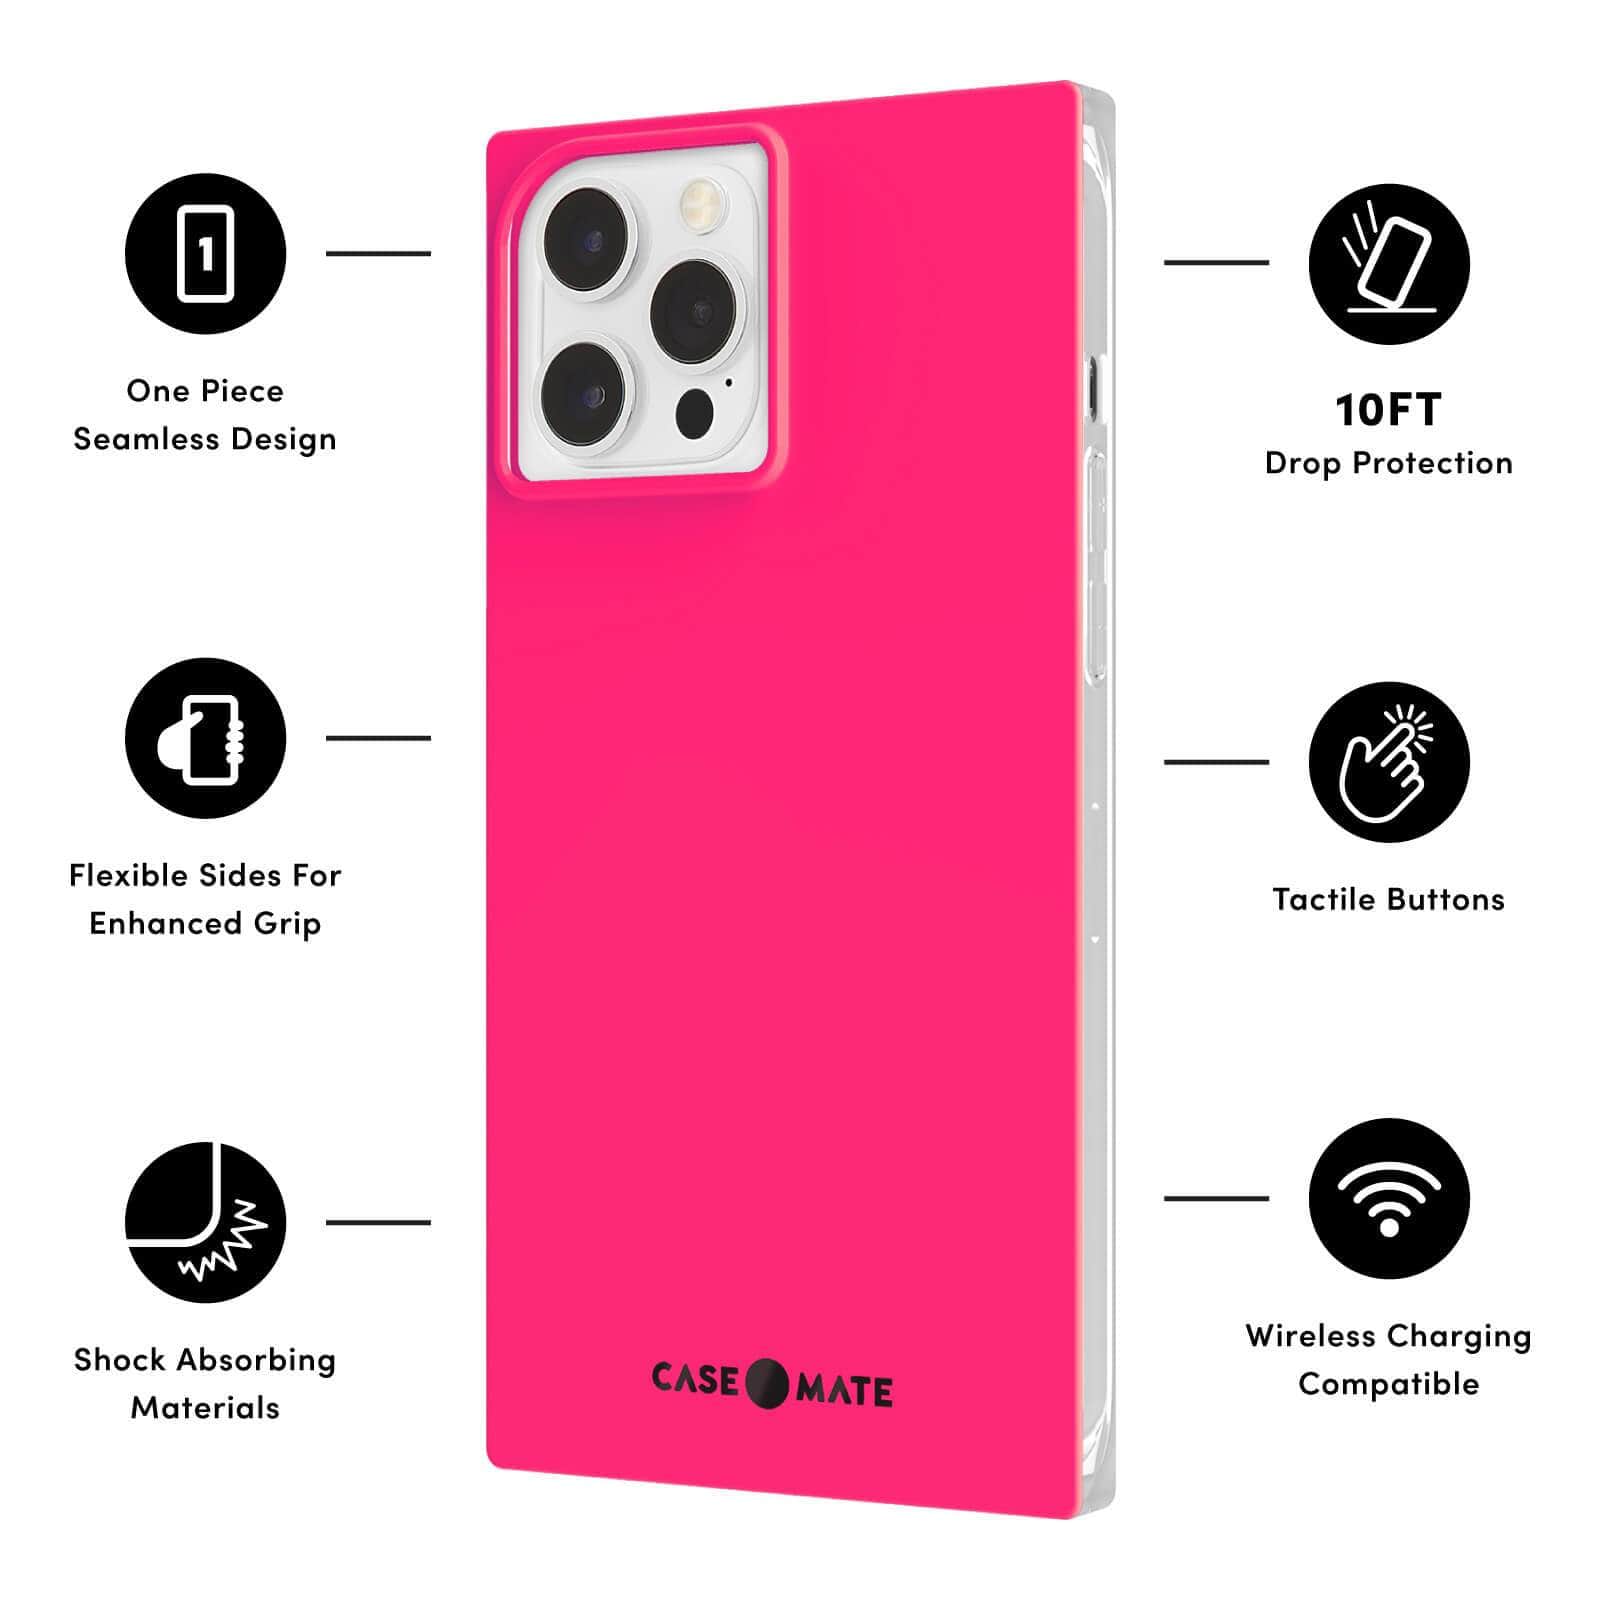 Features One Piece Seamless Design, Flexible Sides for Enhanced Grip, Shock Absorbing Materials, 10 ft Drop Protection, Tactile Buttons, Wireless Charging Compatible. color::Hot Pink